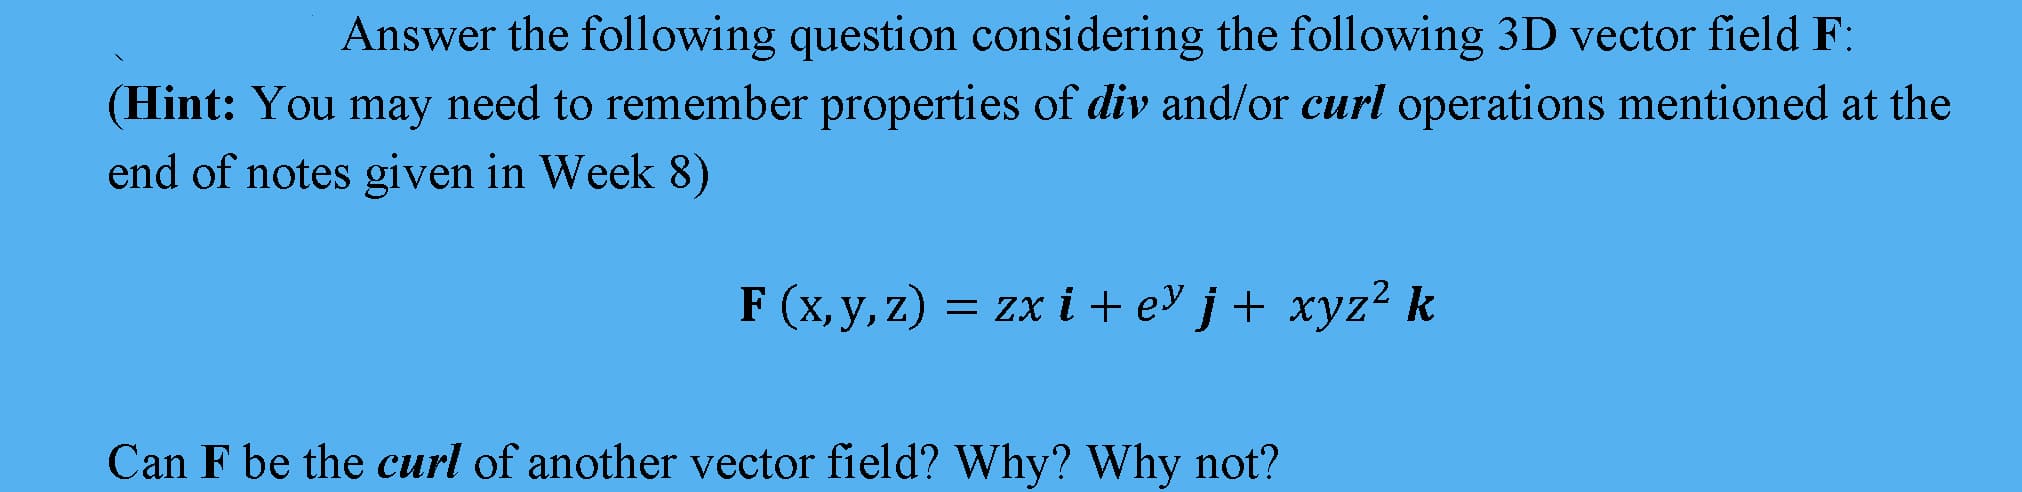 Answer the following question considering the following 3D vector field F:
(Hint: You may need to remember properties of div and/or curl operations mentioned at the
end of notes given in Week &8)
F (x, y, z)
= zx i + eY j + xyz² k
Can F be the curl of another vector field? Why? Why not?
